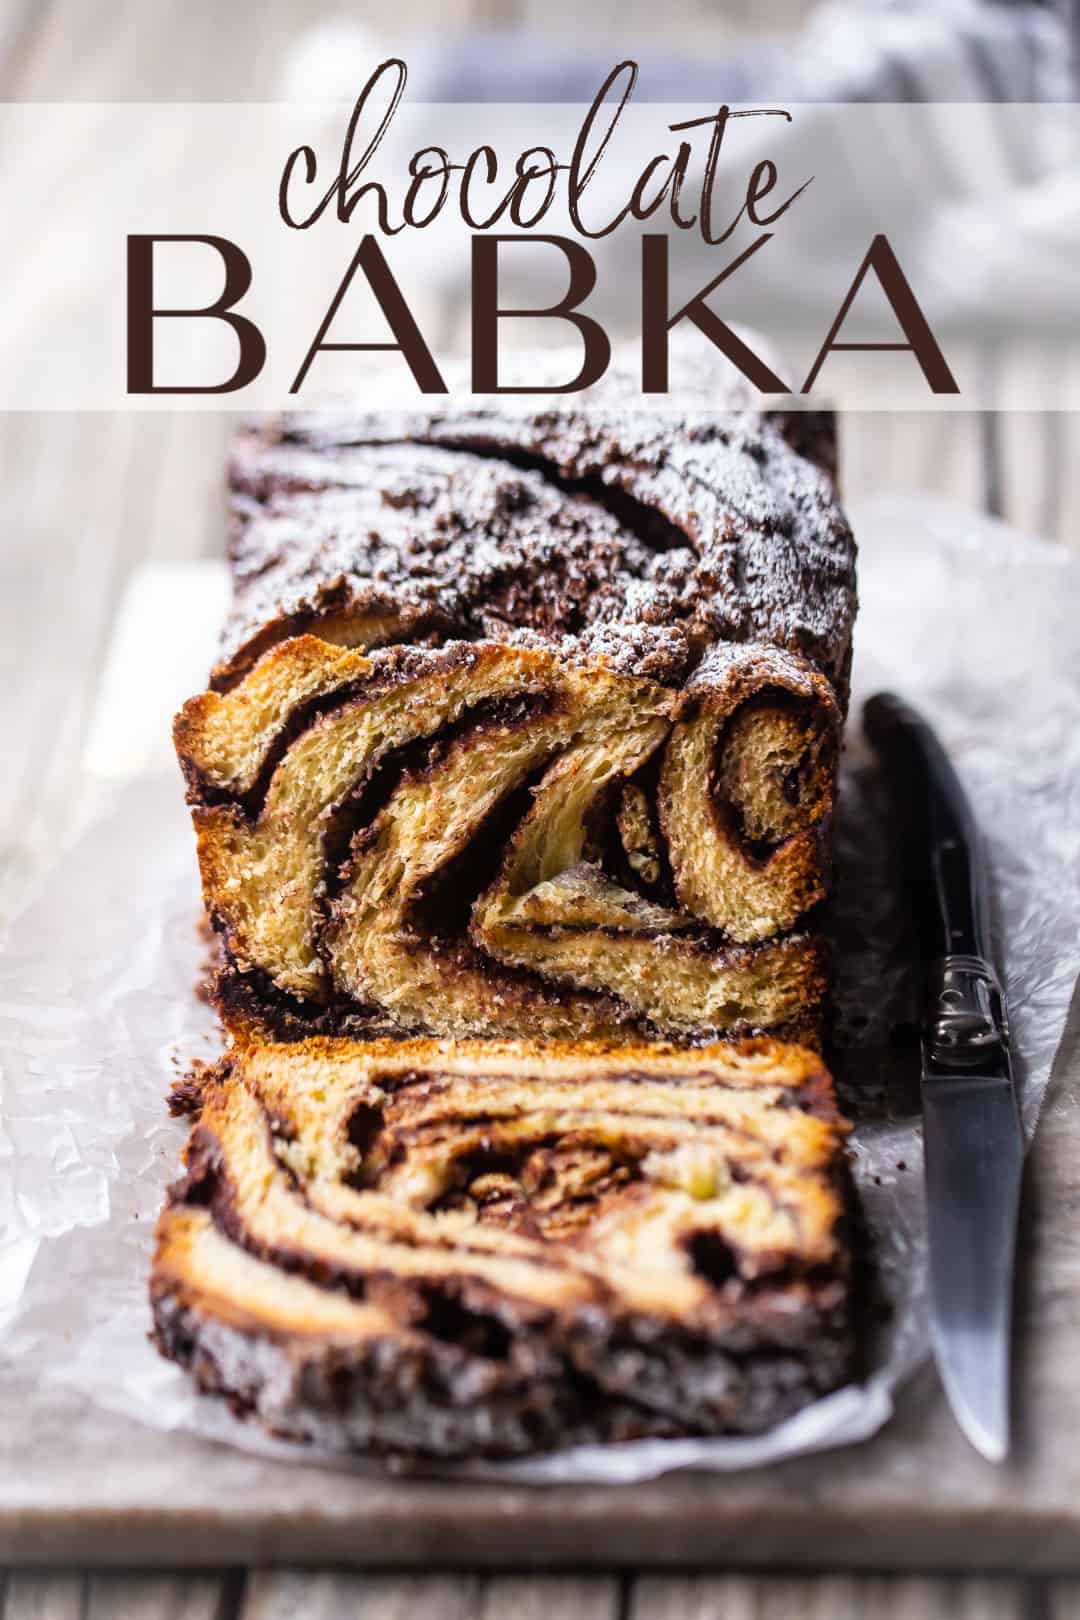 Chocolate babka recipe, prepared, sliced, and served on a marble board, with a text overlay above that reads "Chocolate Babka."